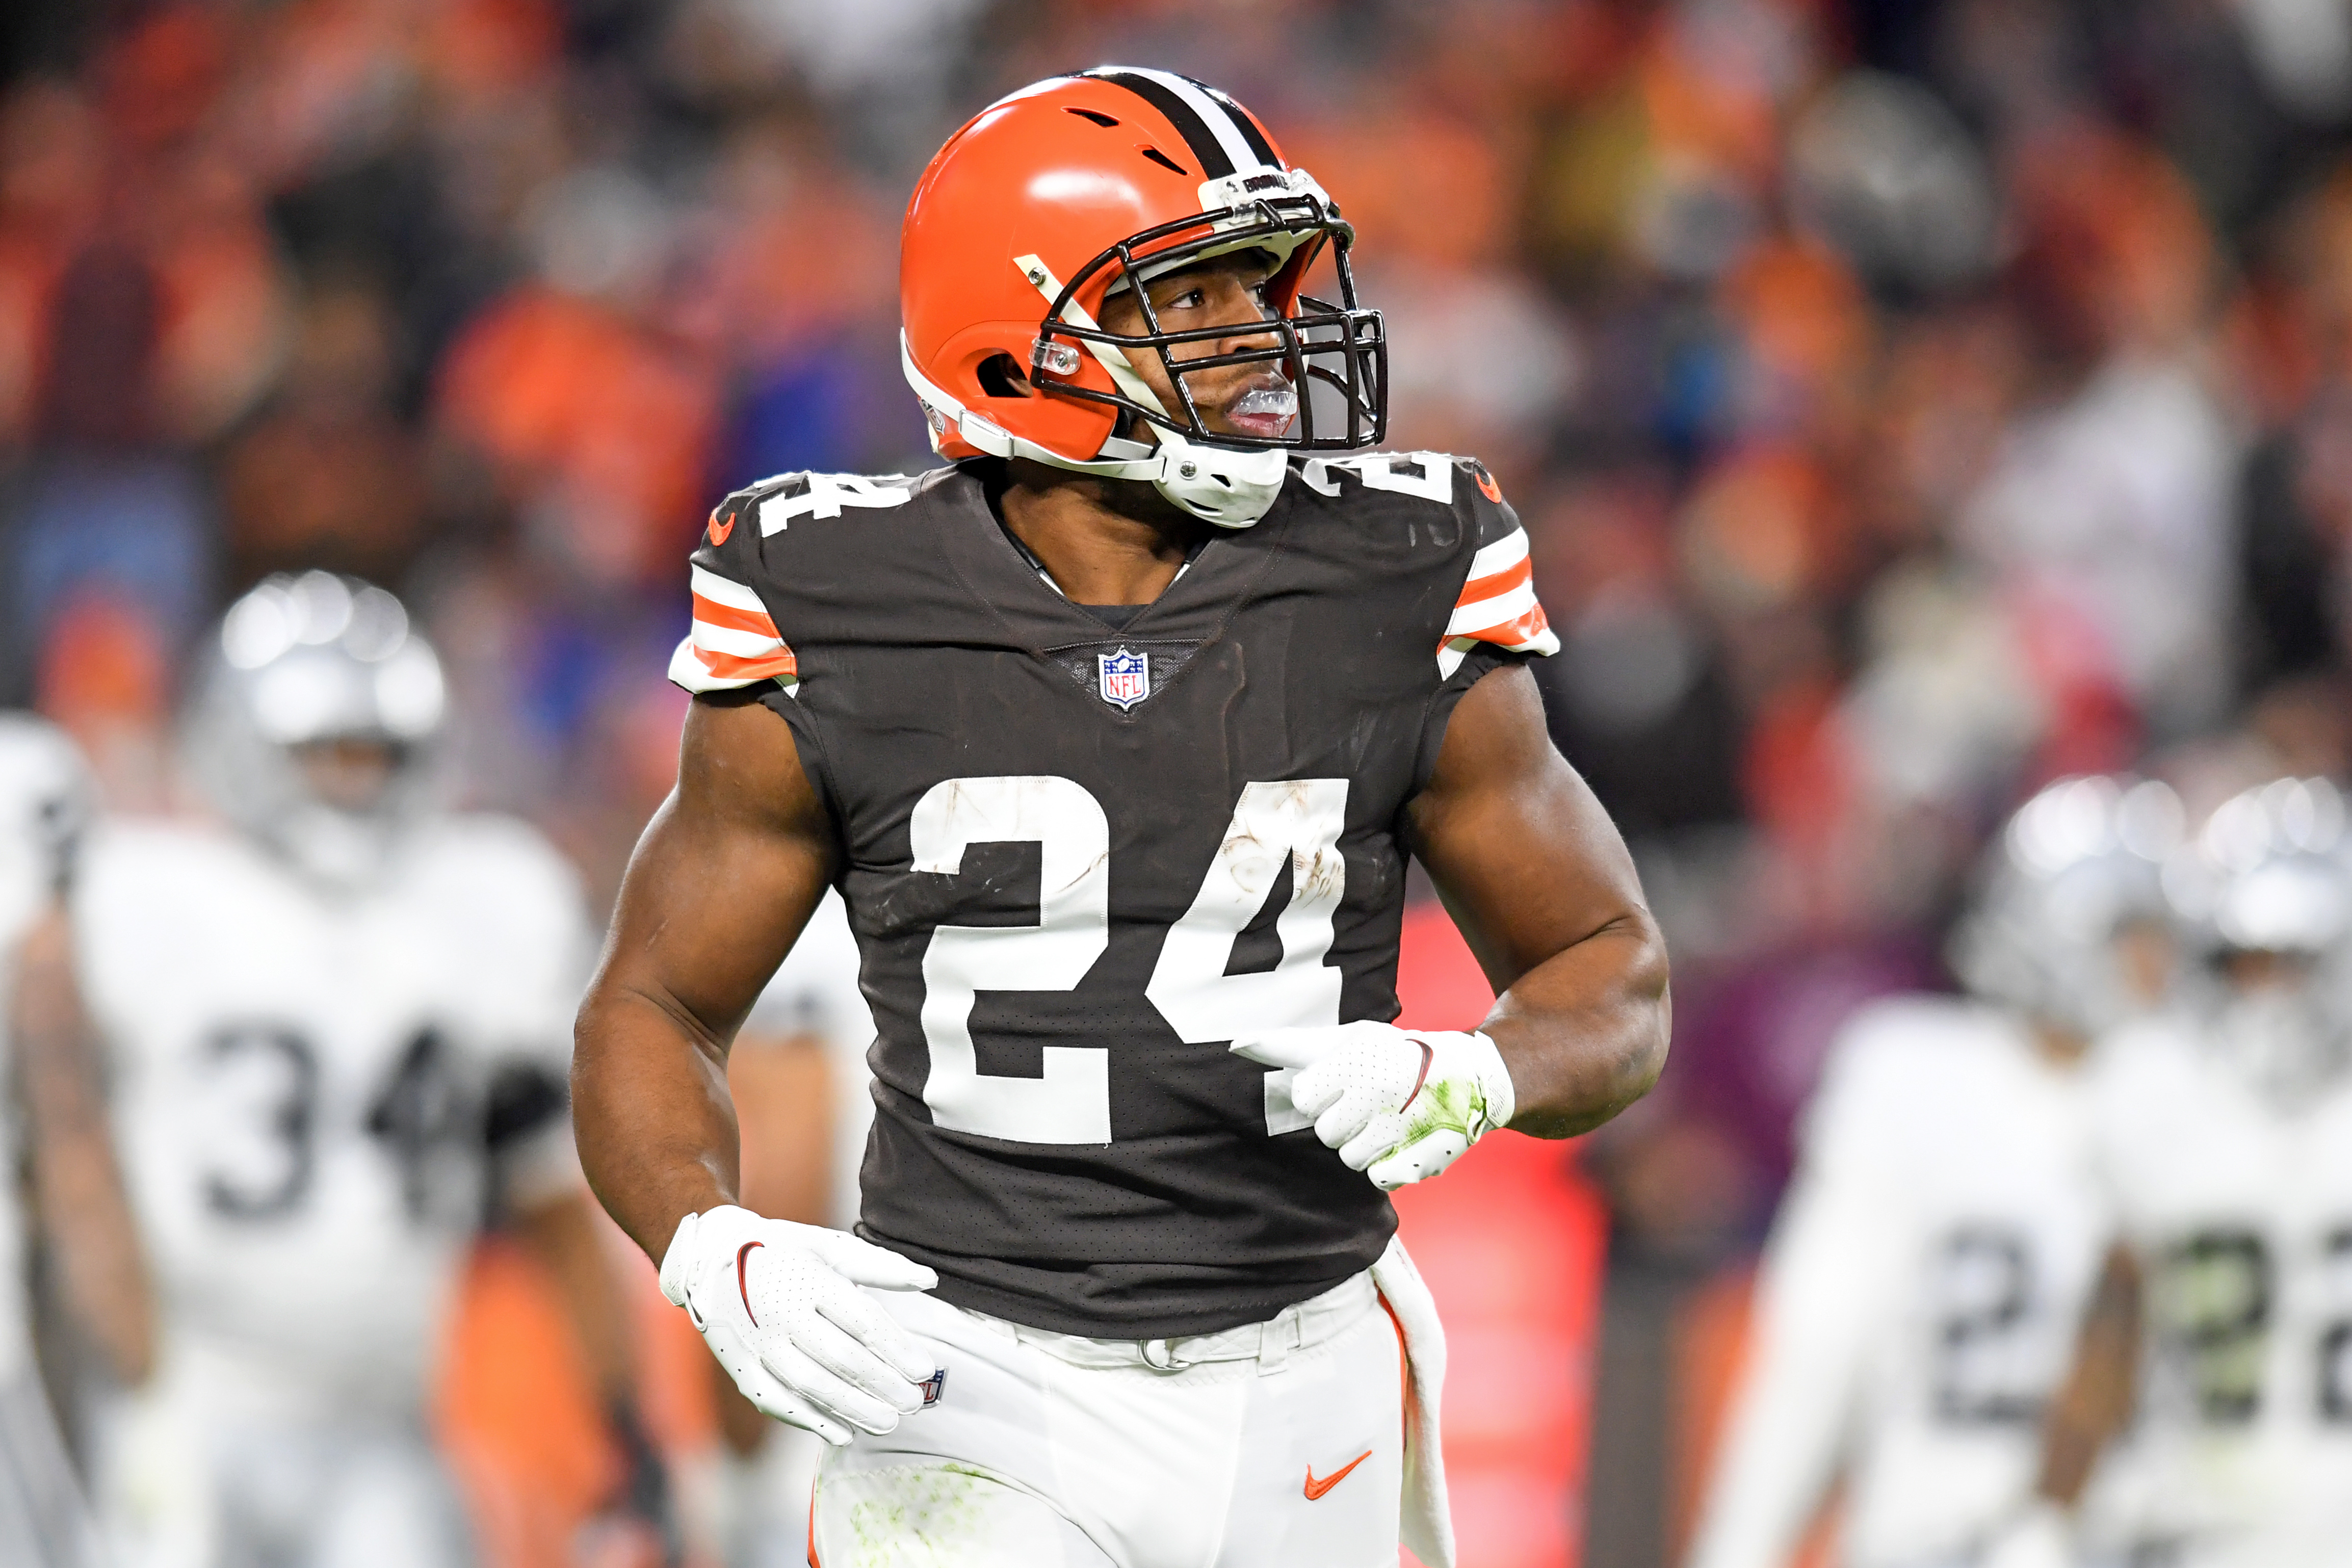 Nick Chubb #24 of the Cleveland Browns runs off the field during the first half against the Las Vegas Raiders at FirstEnergy Stadium in Cleveland, Ohio.